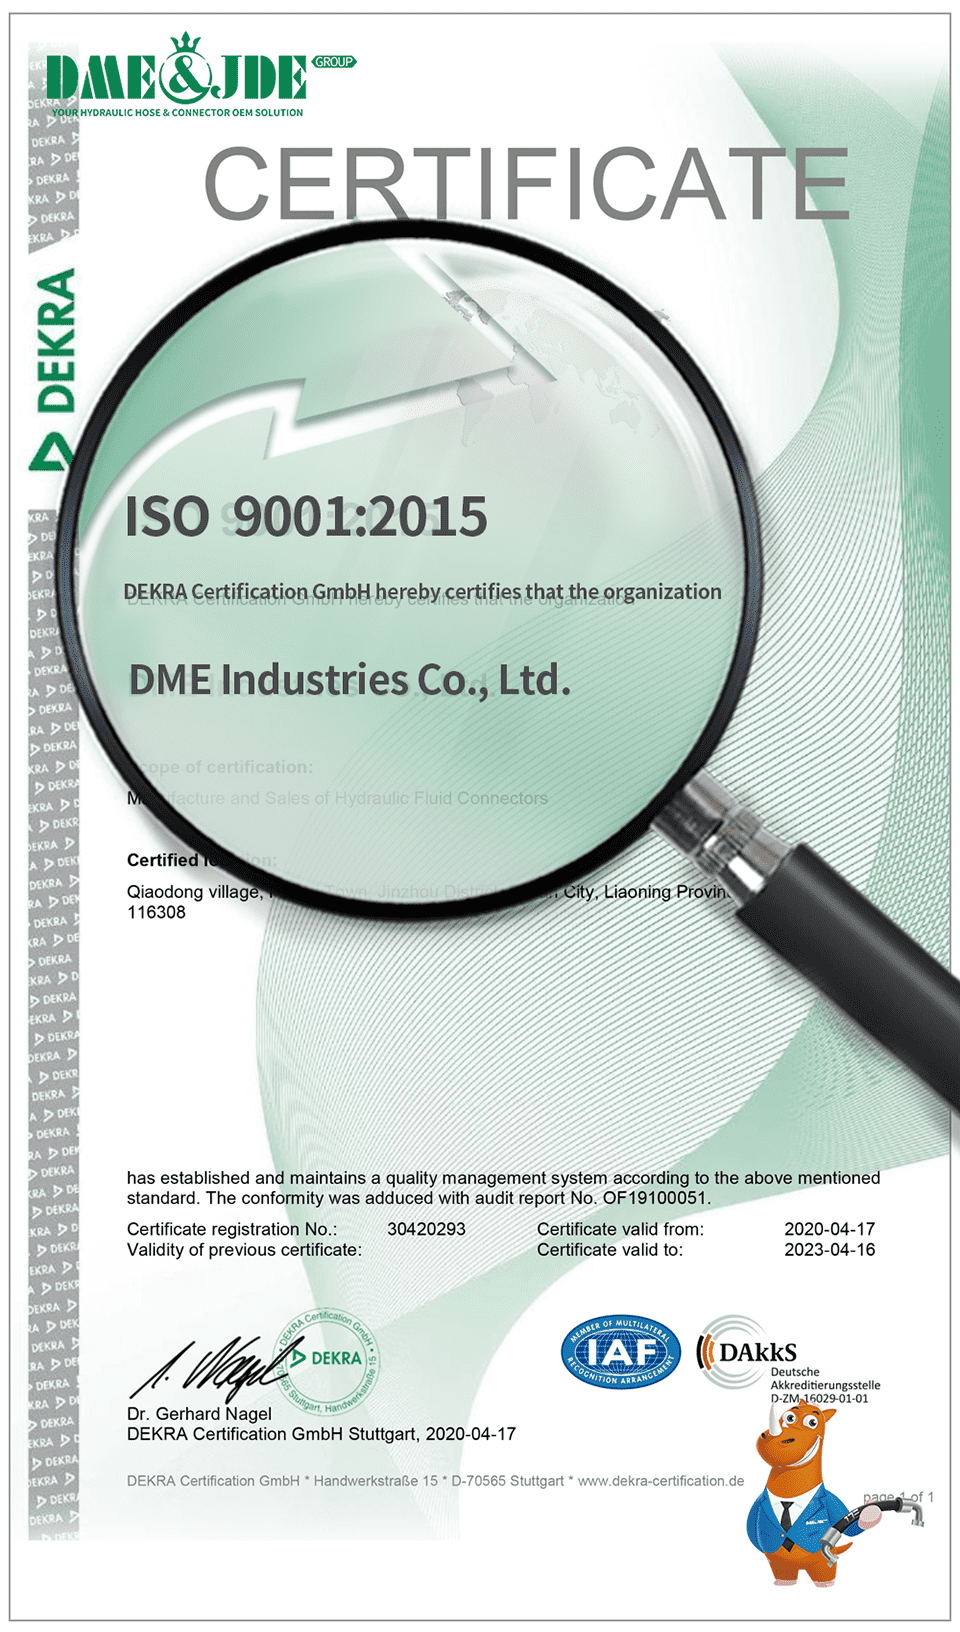 An ISO 9001 certification cover